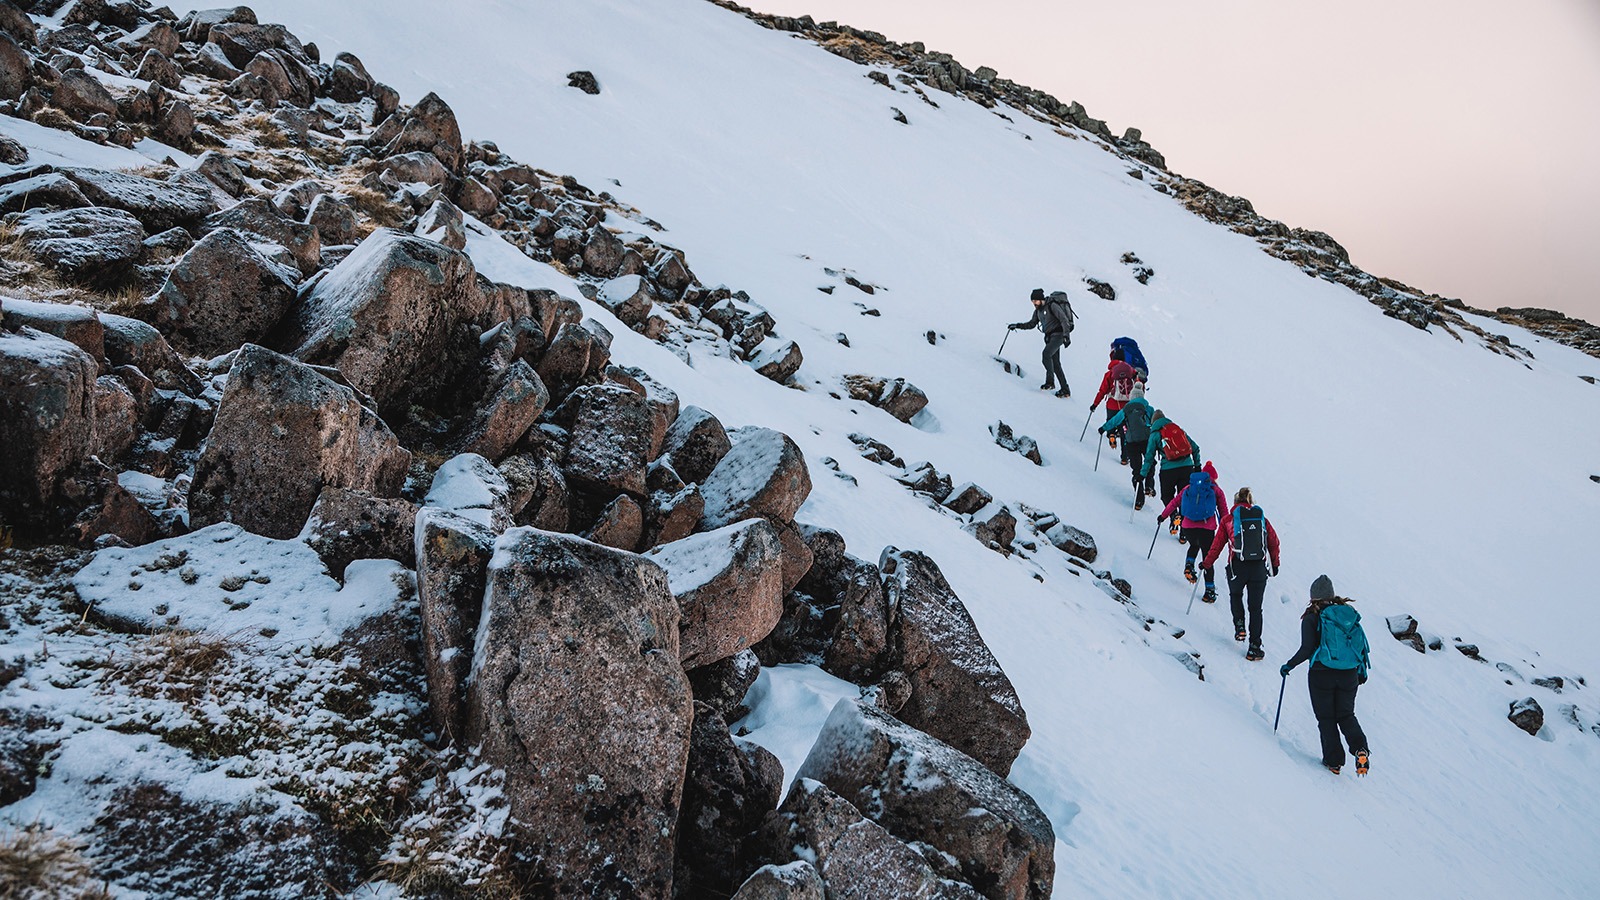 winter hillwalking safety courses in scotland for beginners